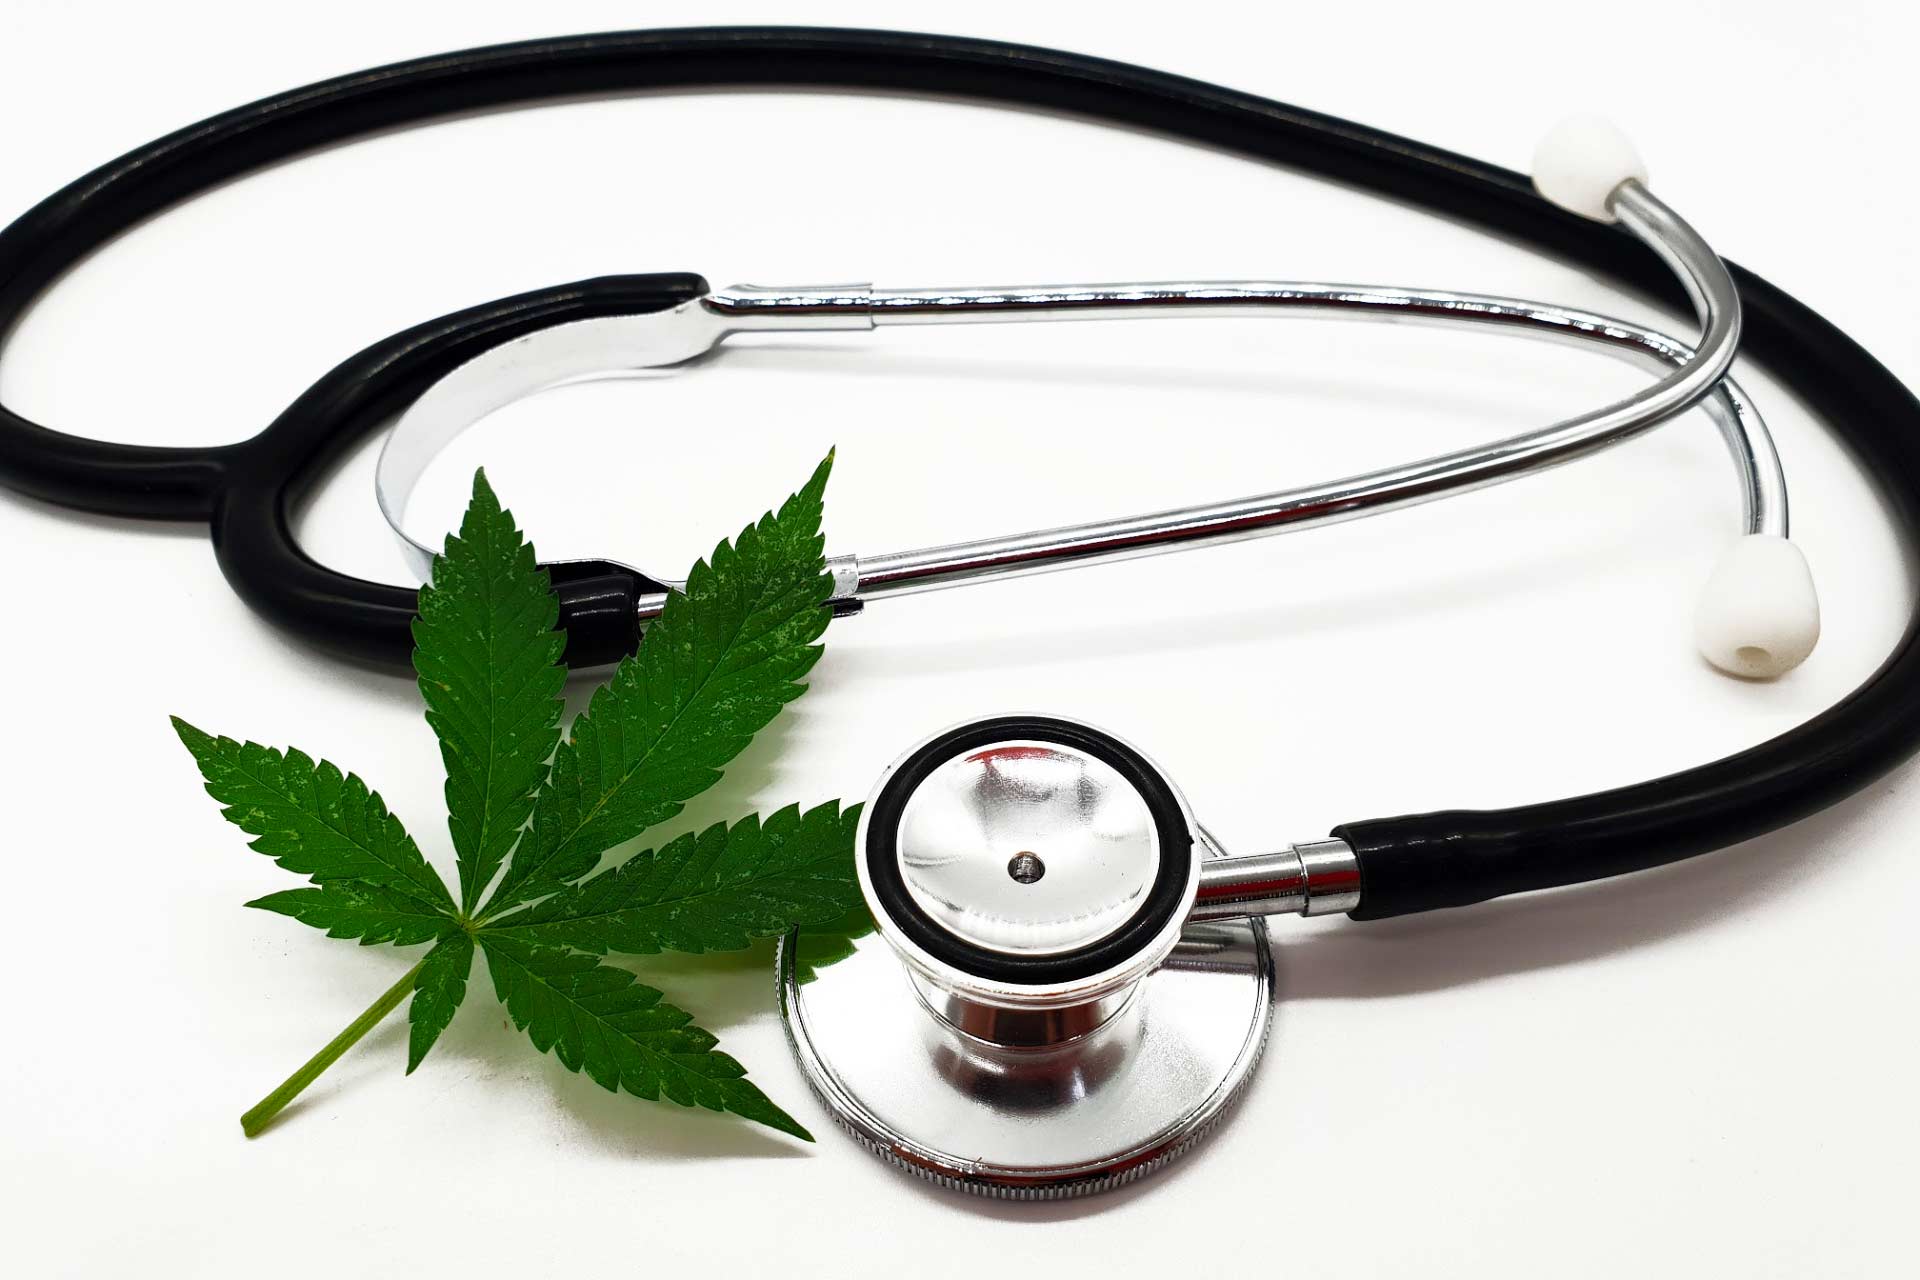 Stethoscope with cannabis leaf, showing connection between health and access to safe legal cannabis.